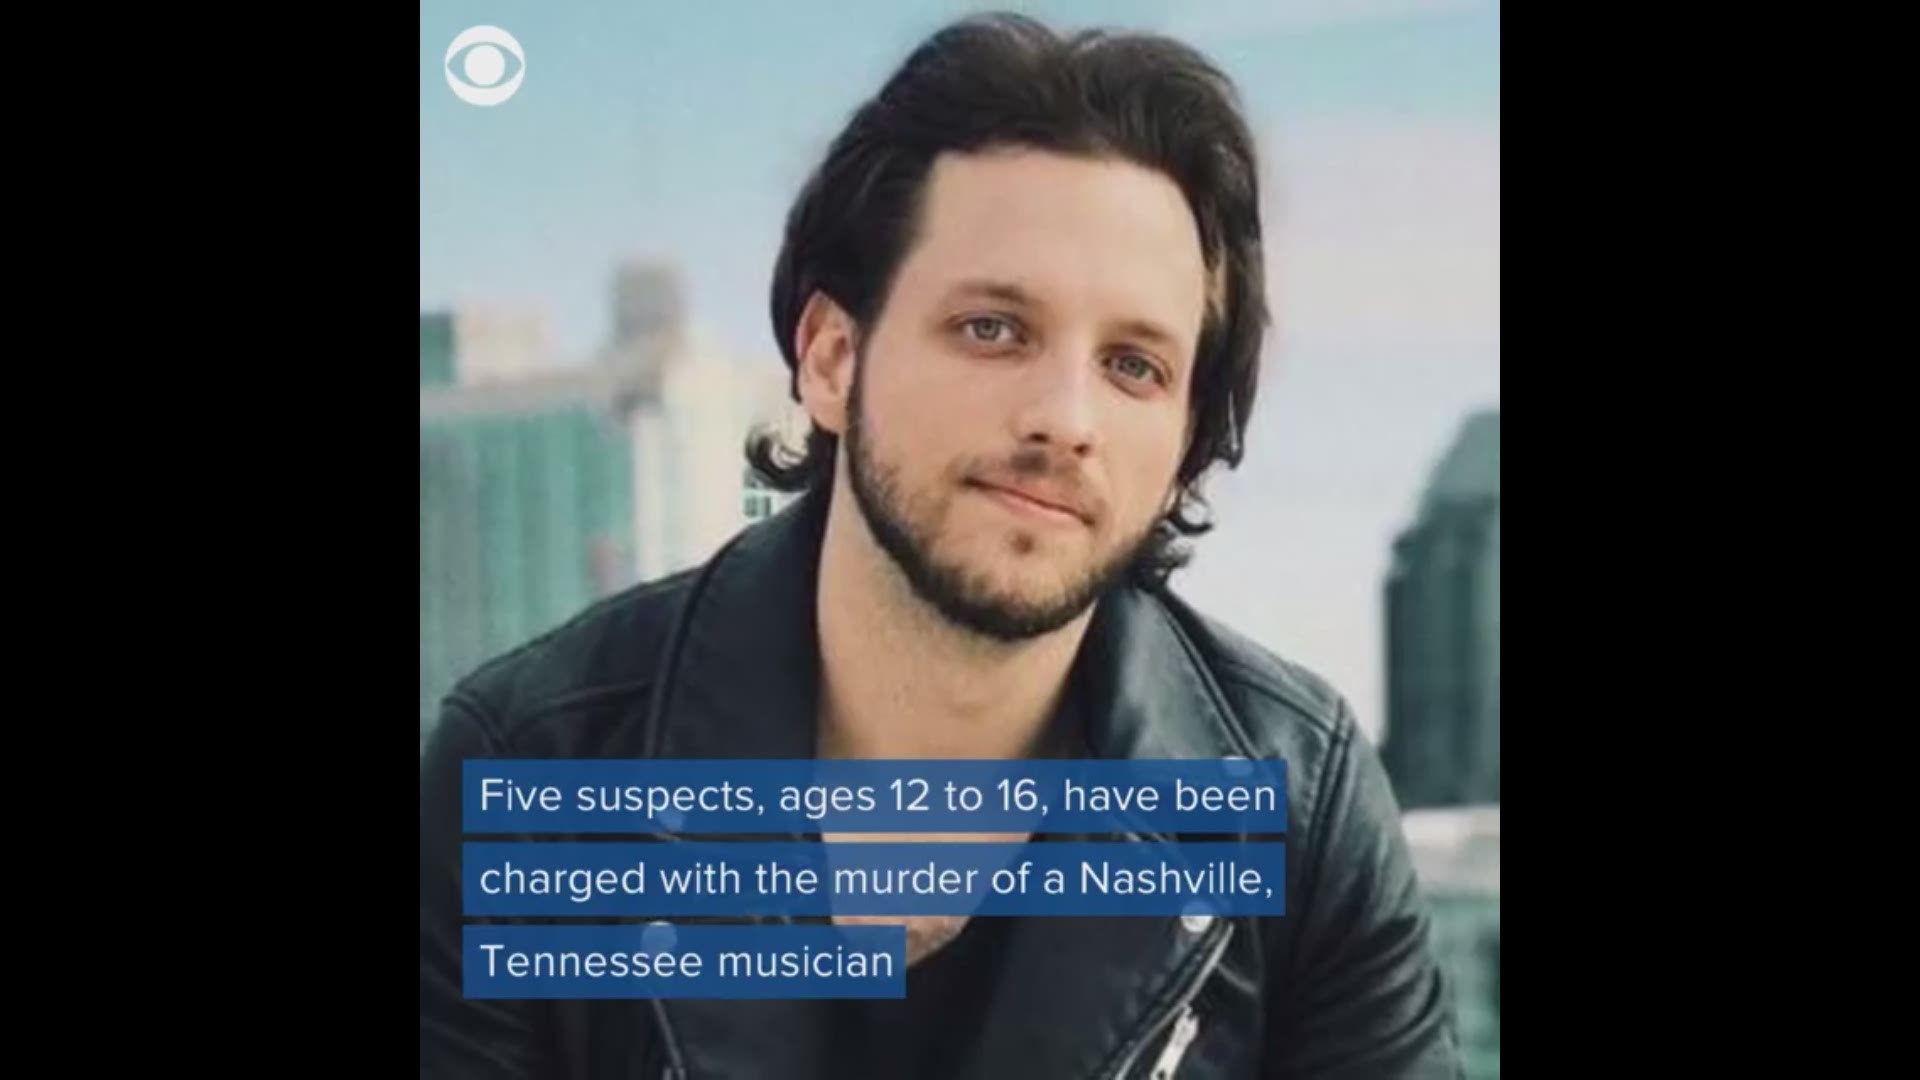 Five suspects, ages 12 to 16, have been charged with the Thursday murder of Nashville, Tennessee musician Kyle Yorlets .